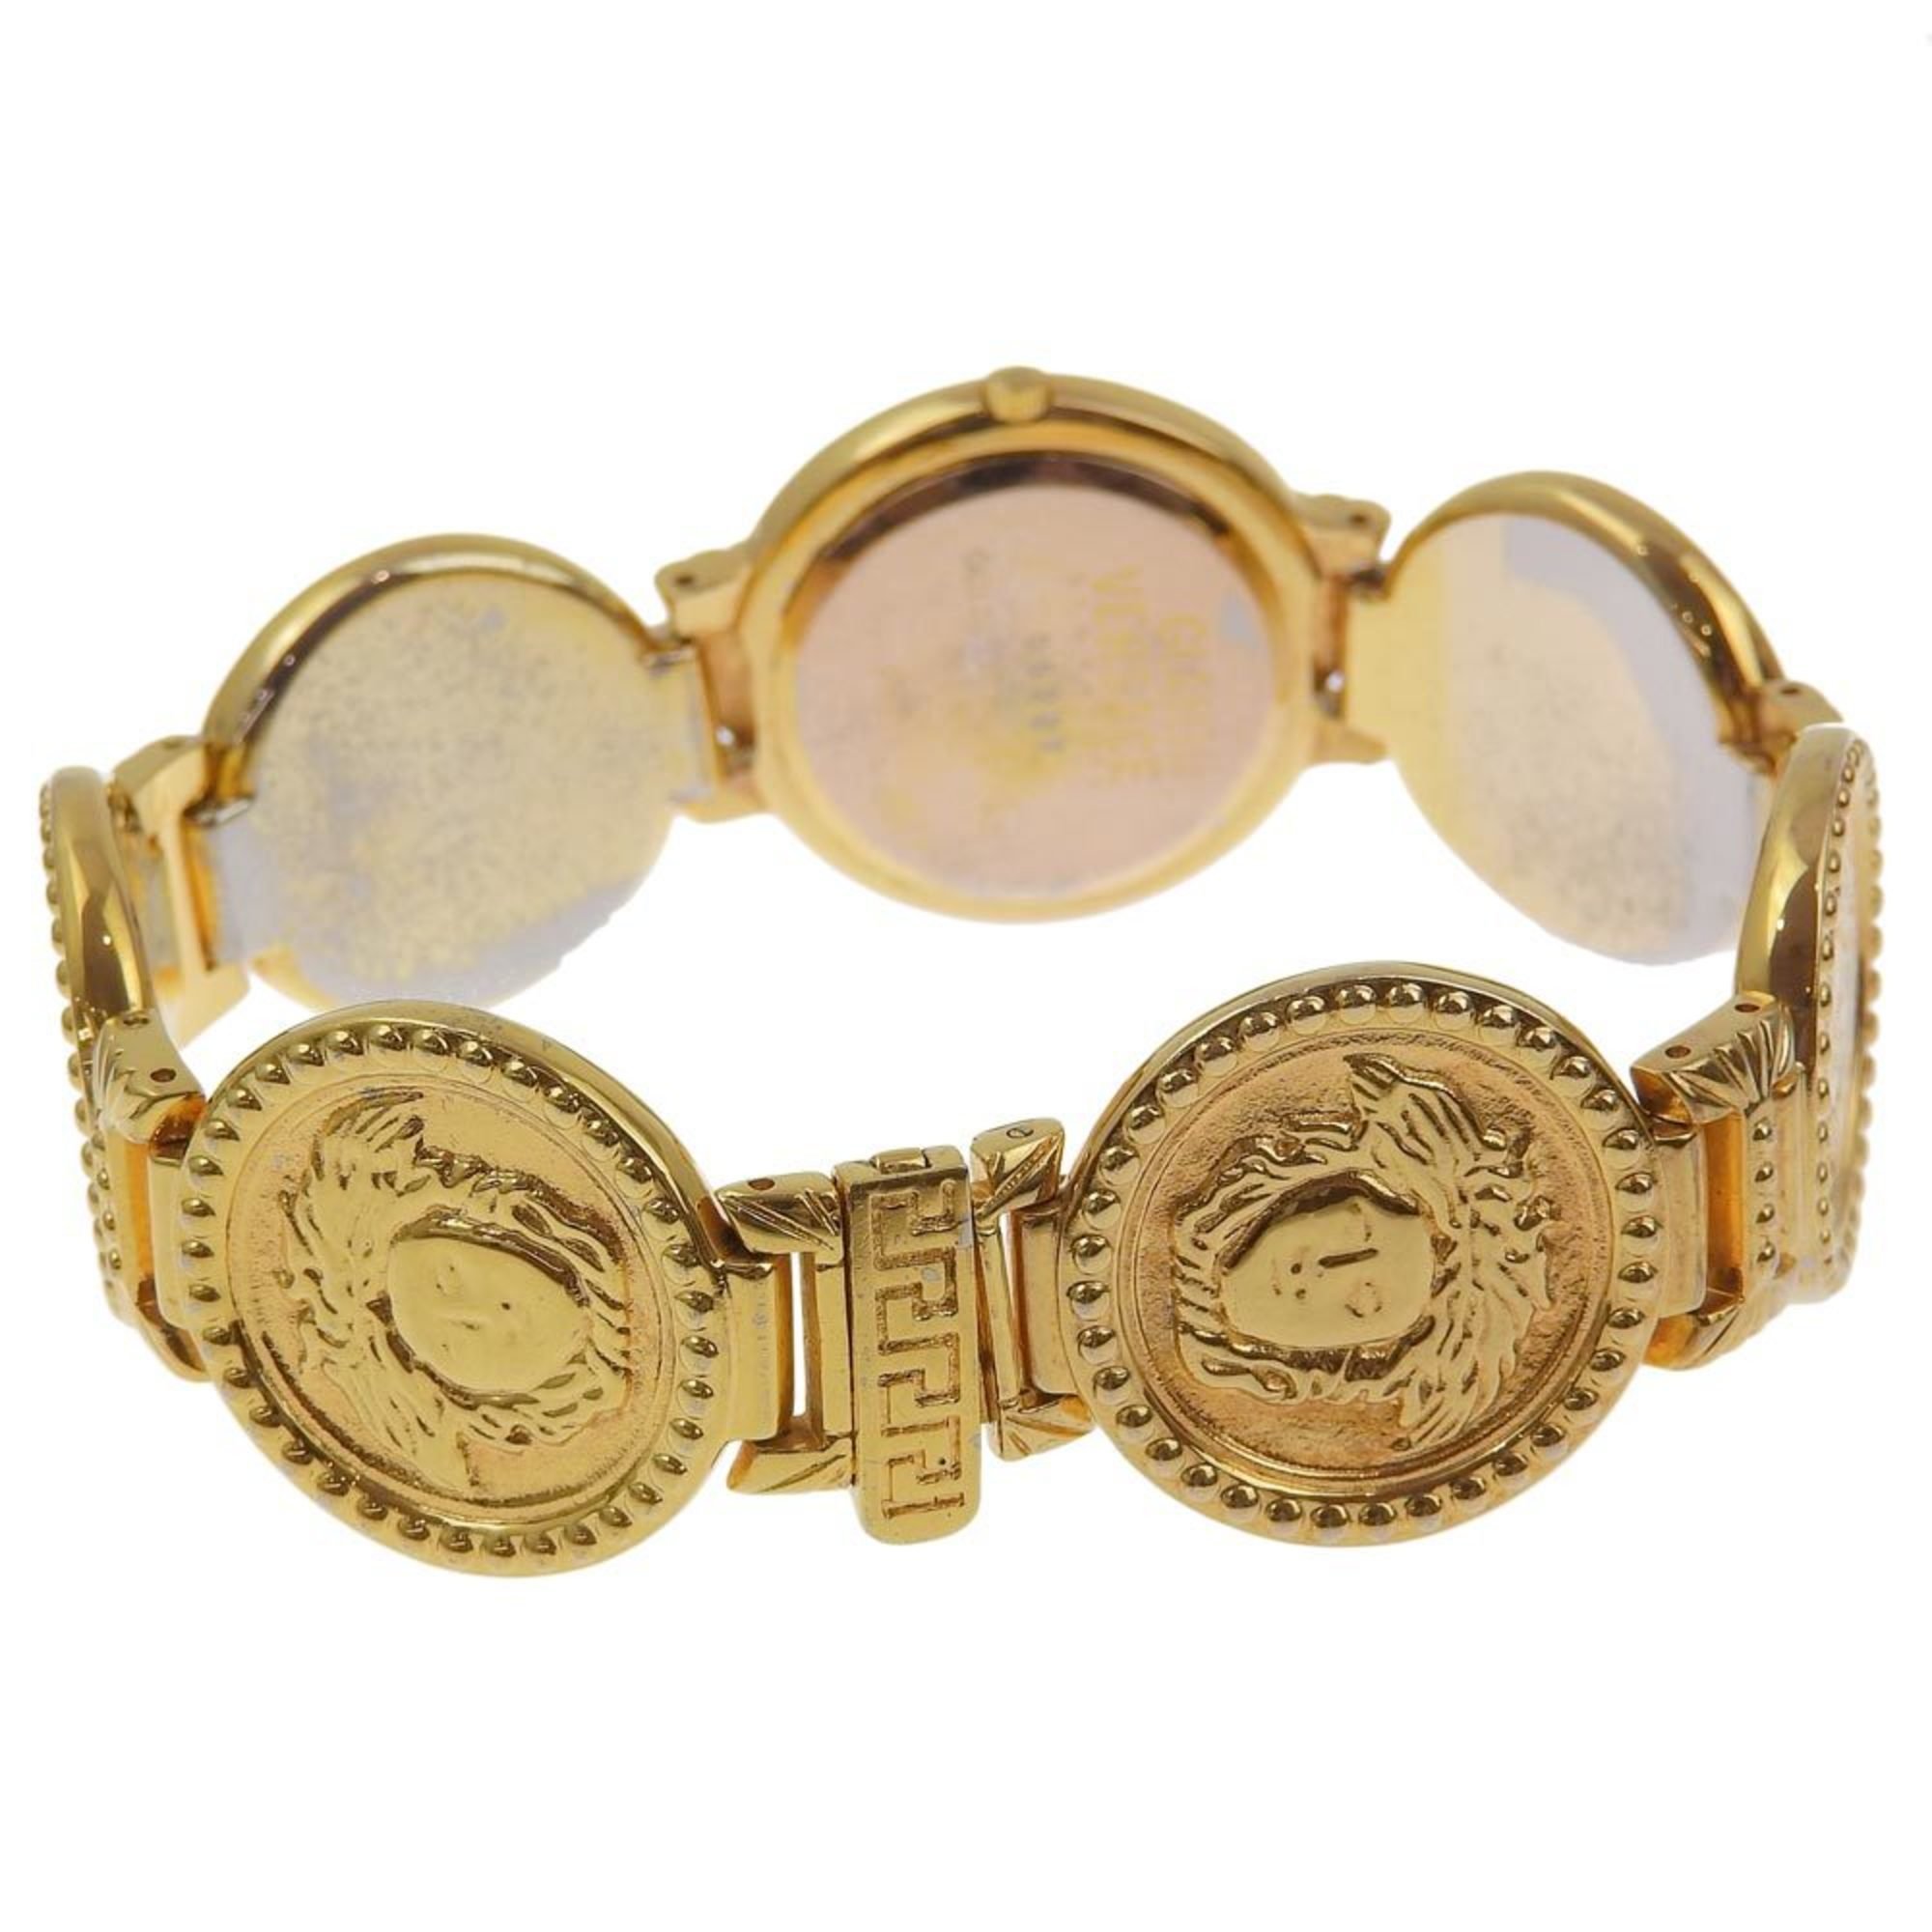 Versace Medusa Watch Coin 7008012 Gold Plated Quartz Analog Display Ladies Dial